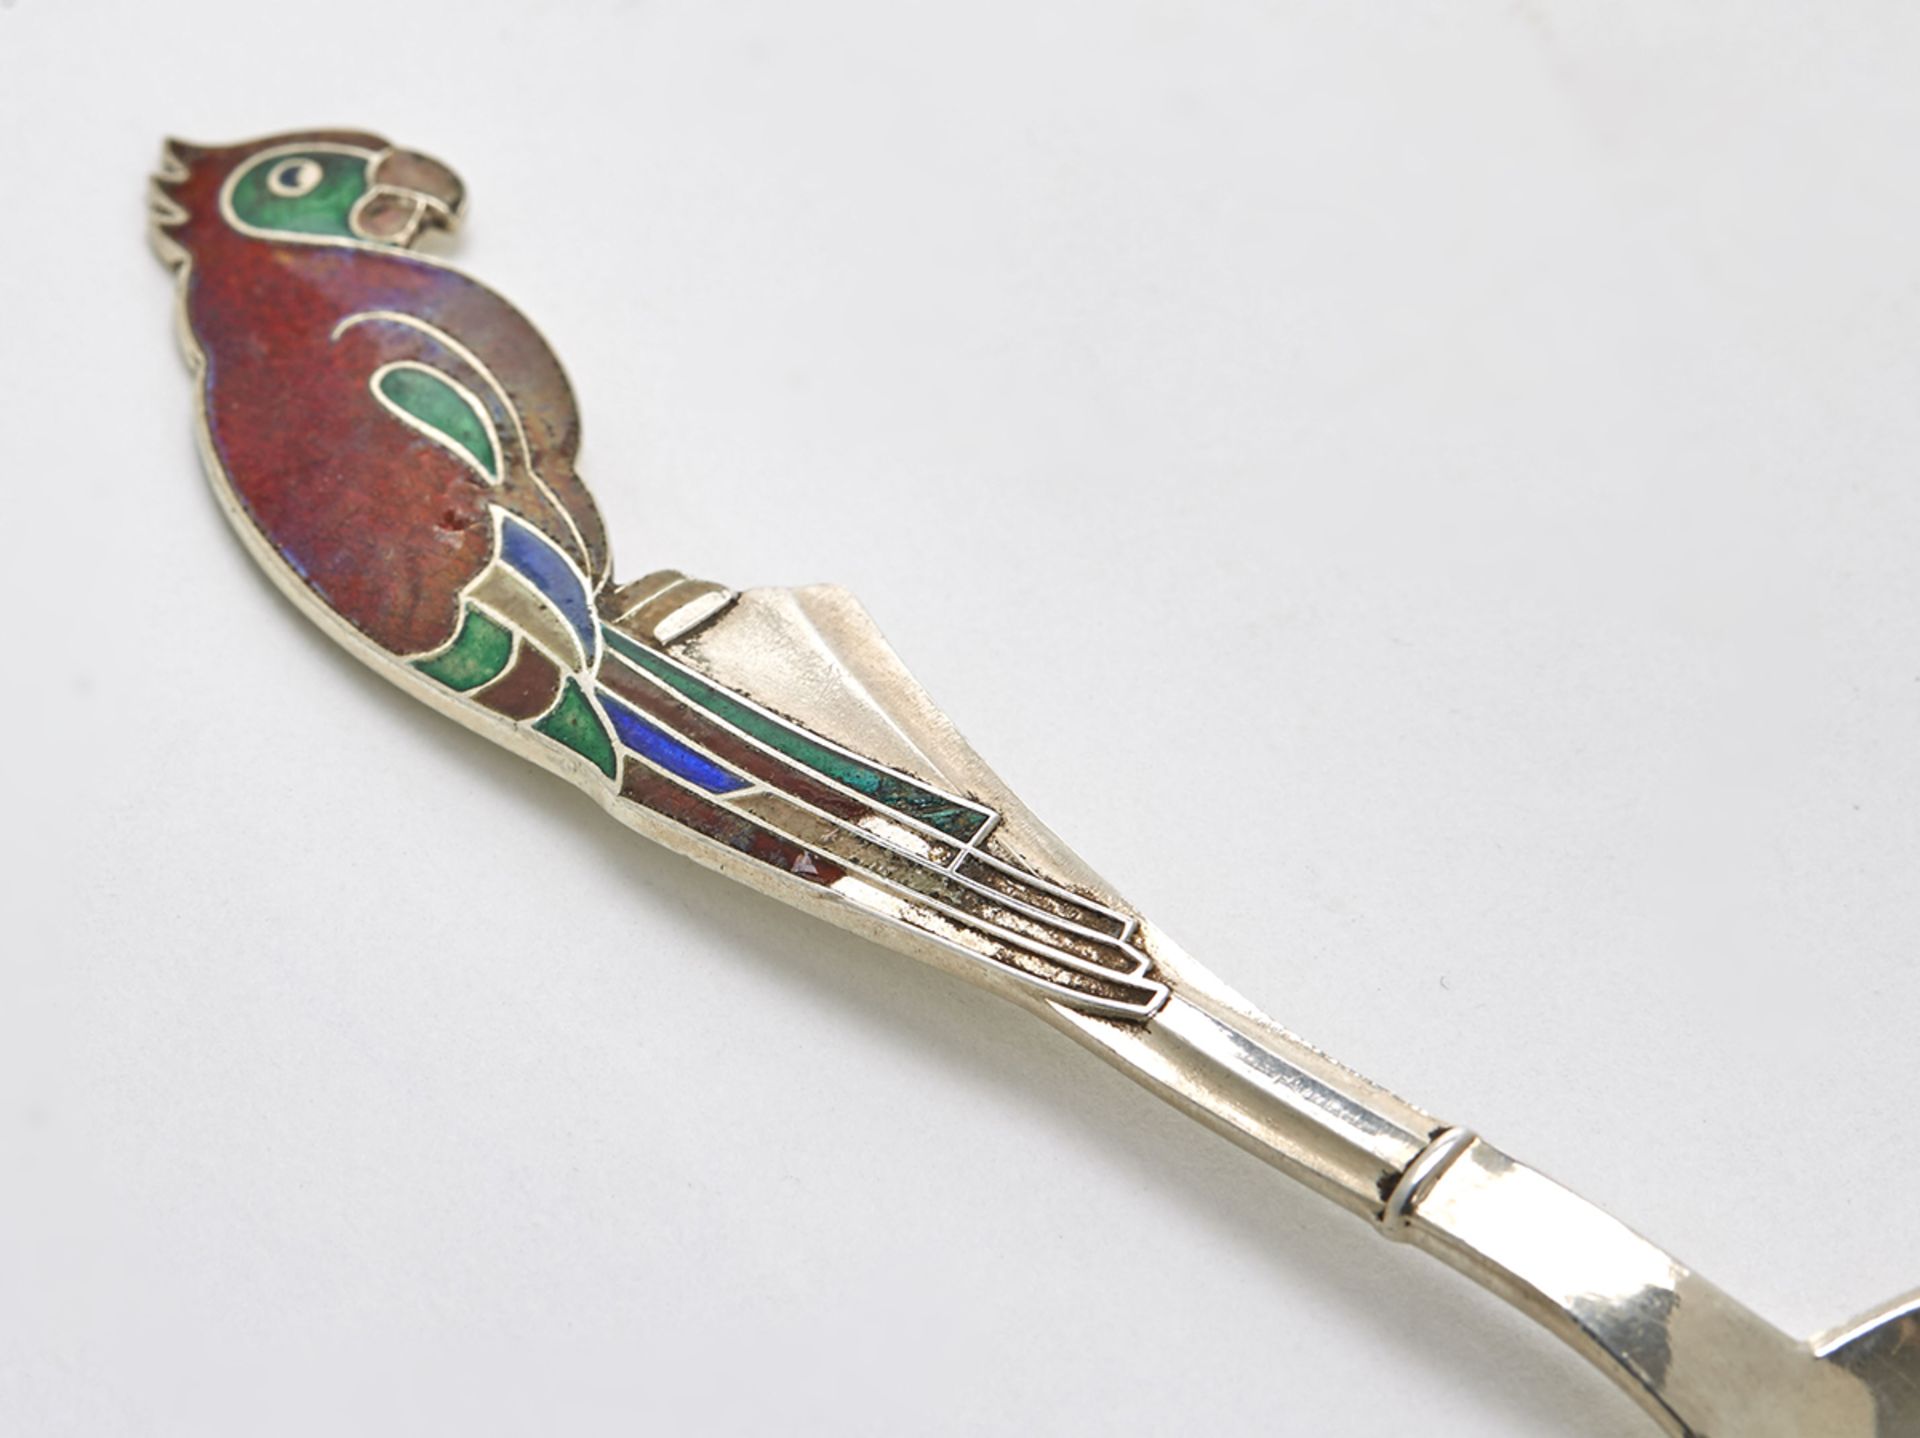 FINE QUALITY VINTAGE RUSSIAN ENAMEL PARROT SPOON 20TH C. - Image 3 of 5